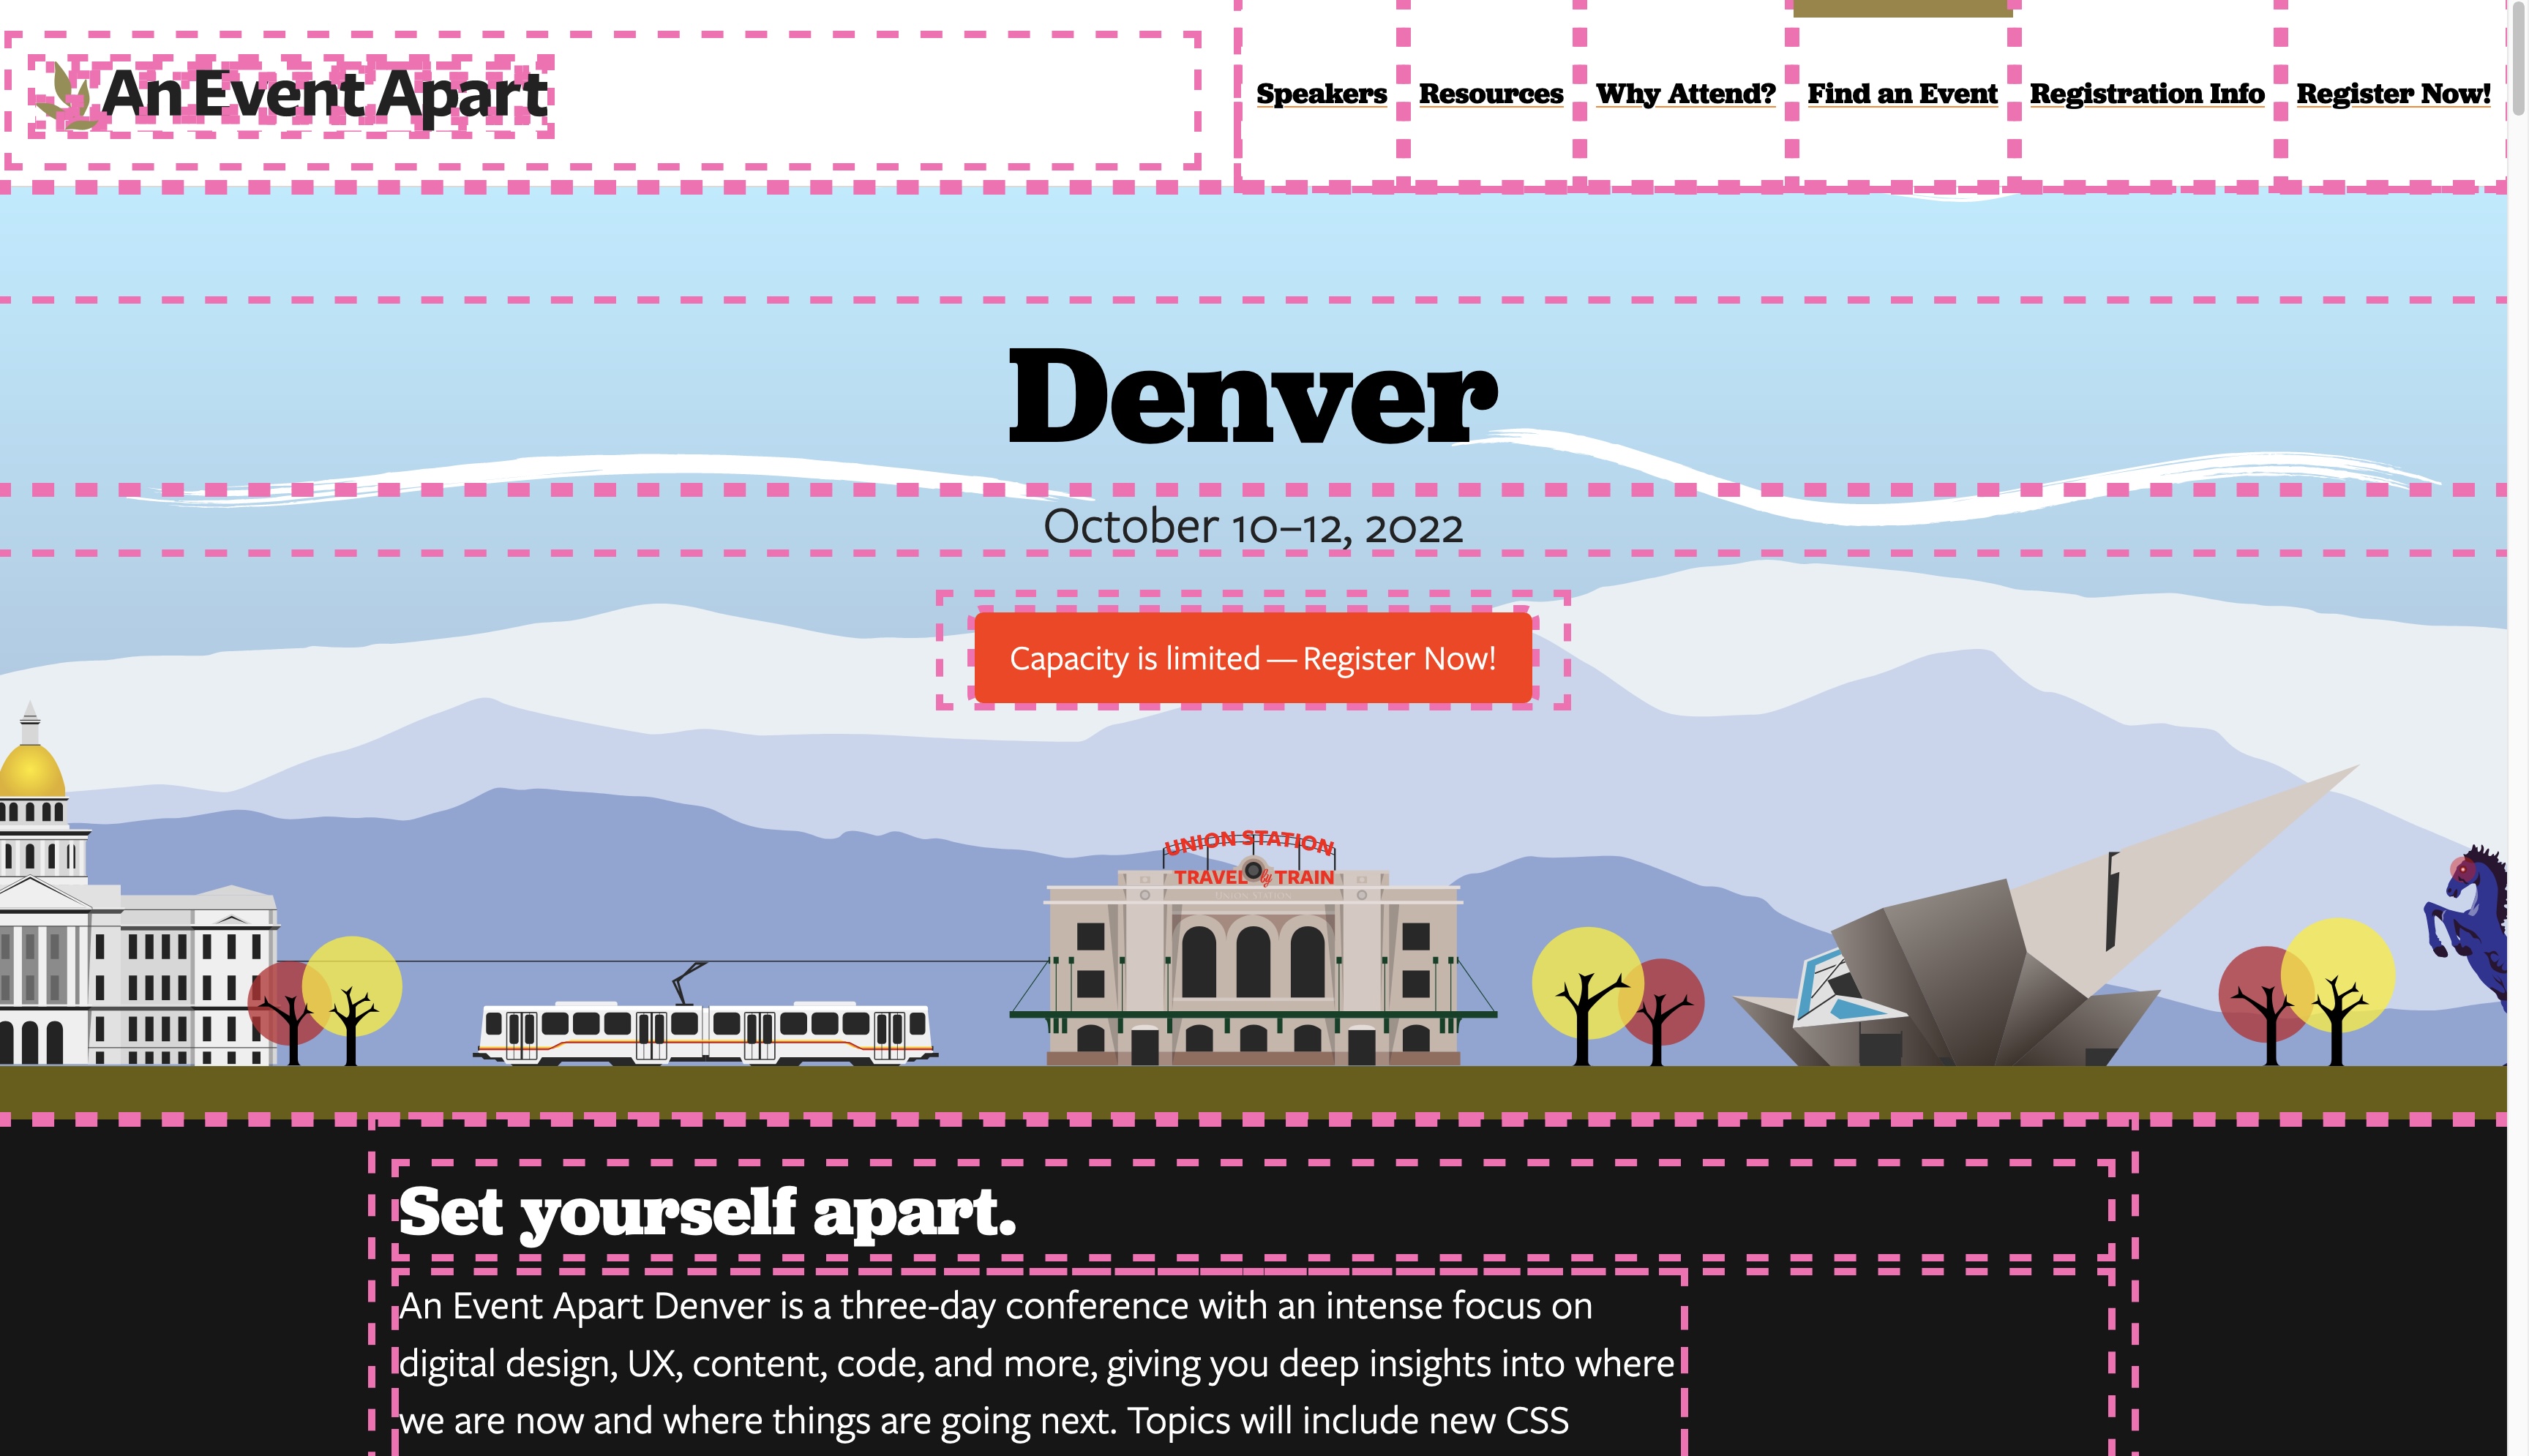 AEA Denver website
with an hotpink dashed outline
around every element on the page
